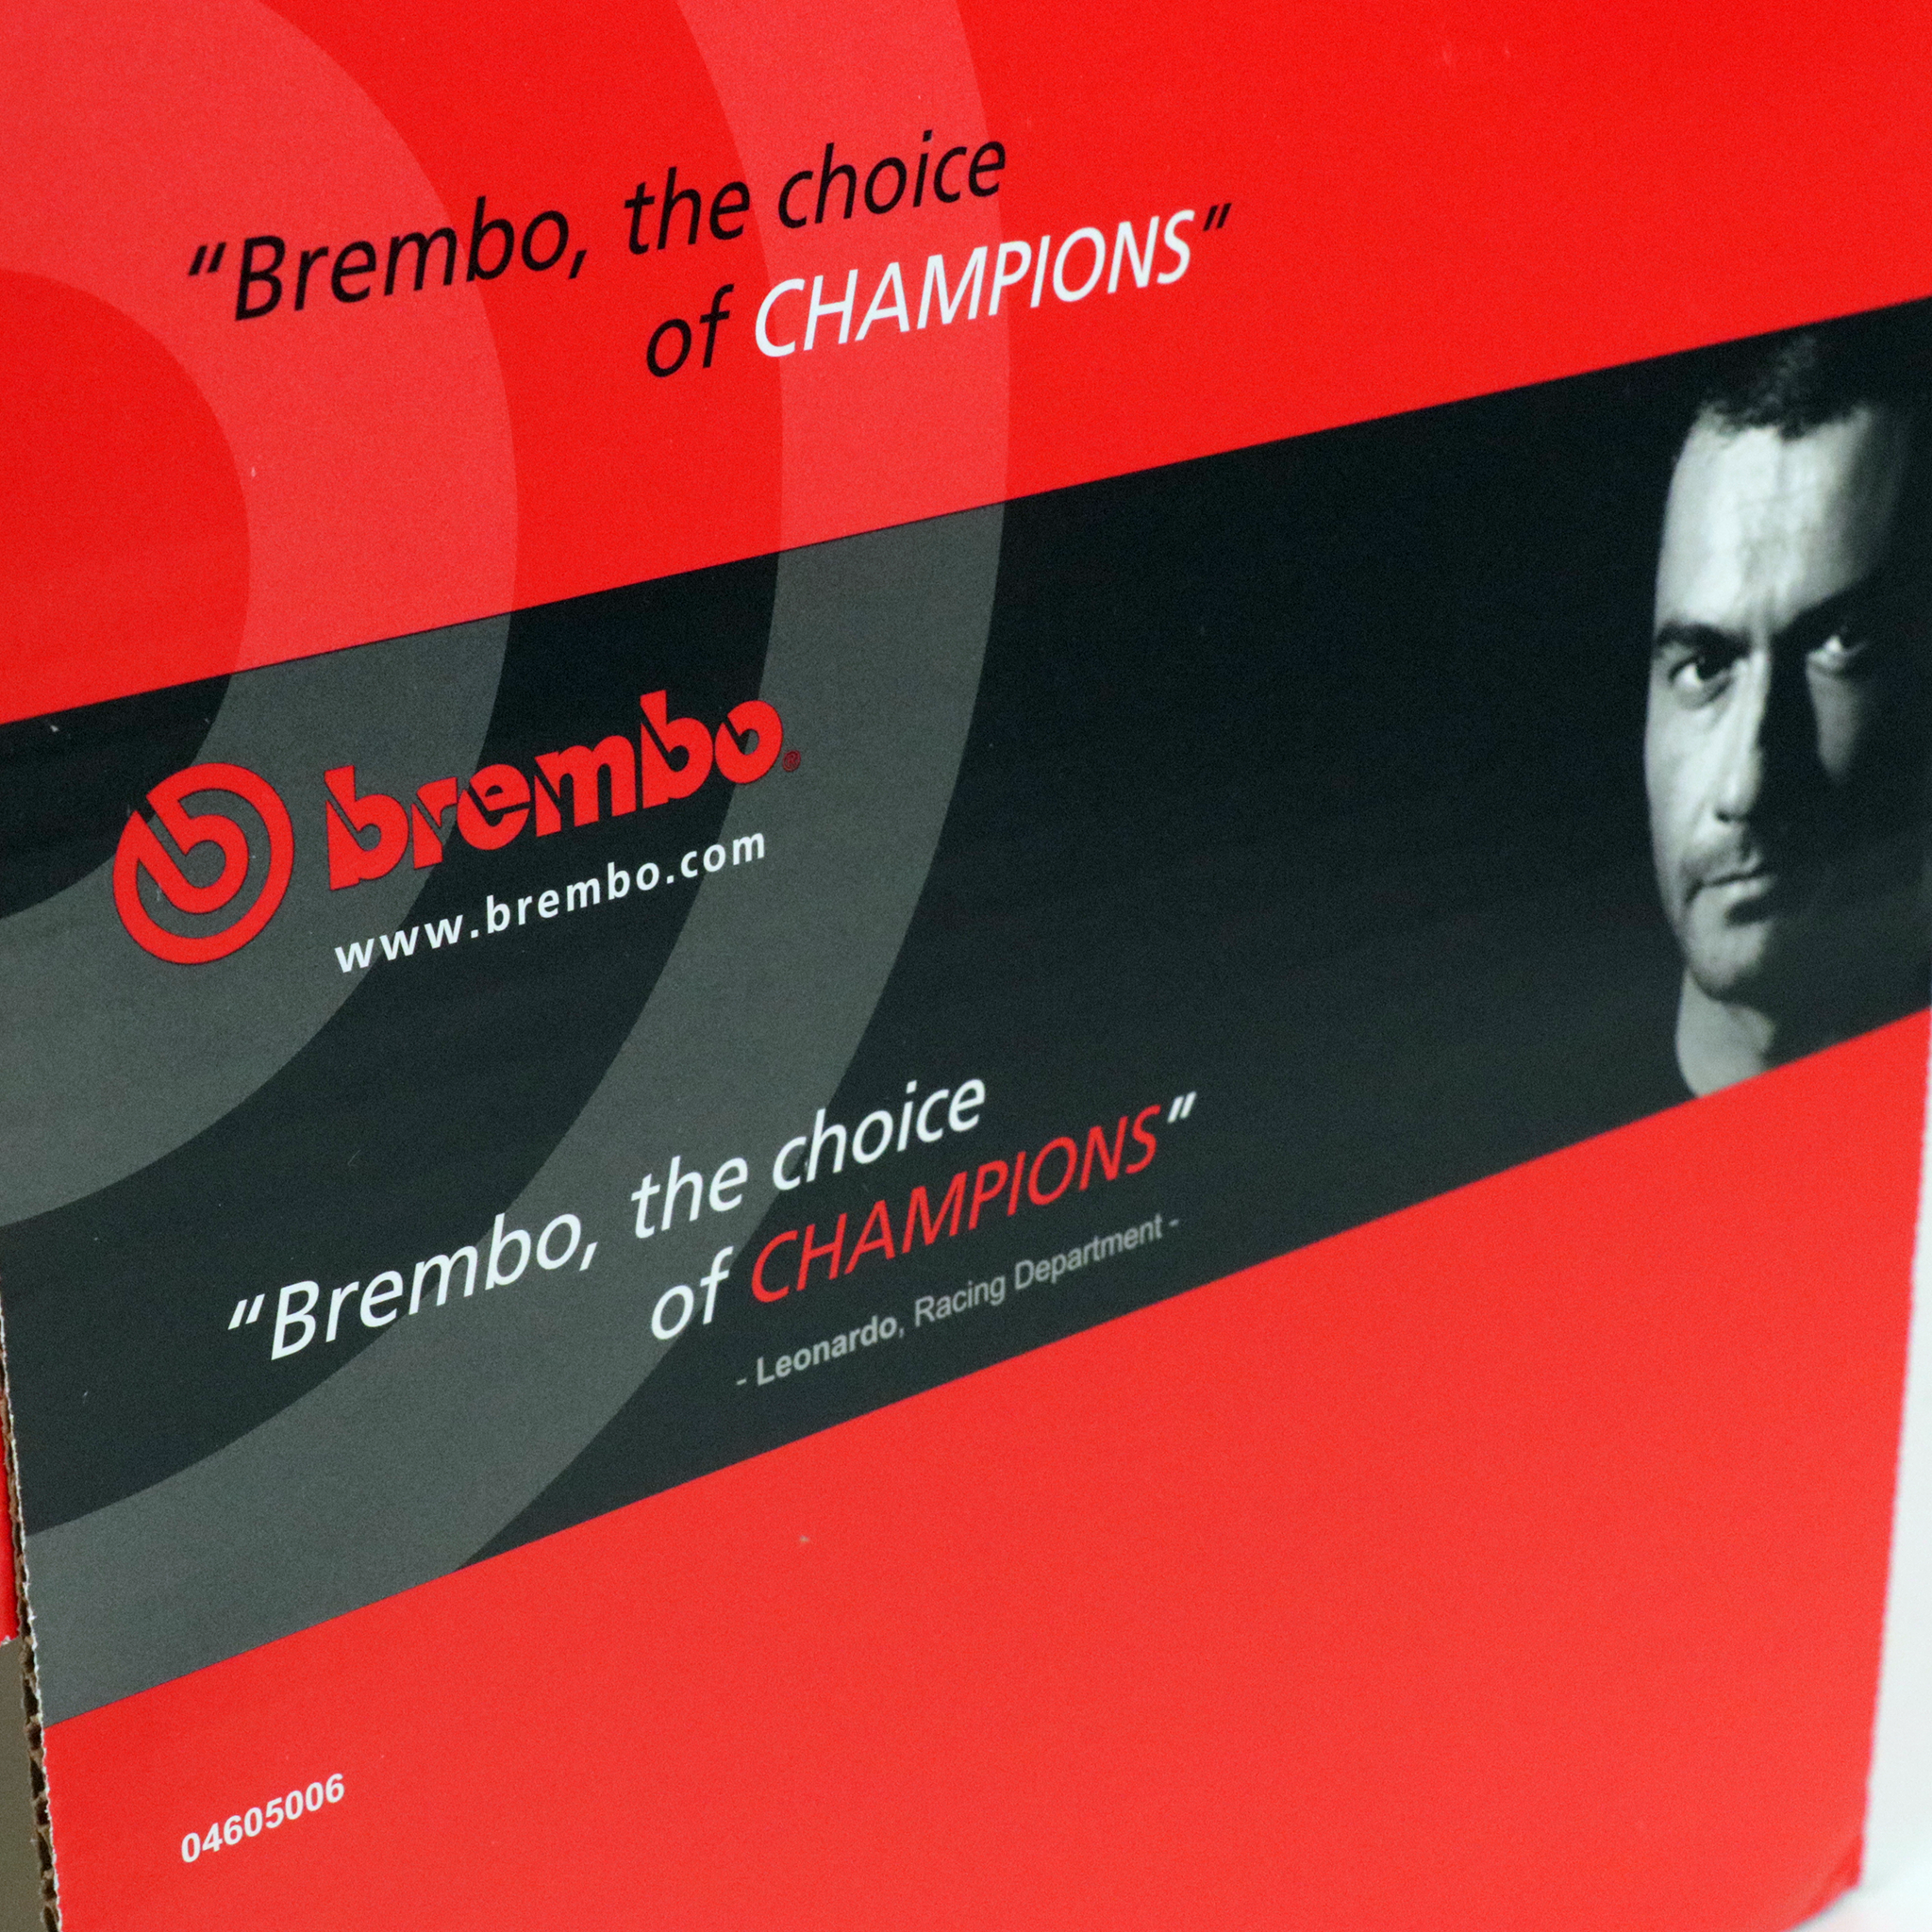 BRAND NEW Brembo "GIFT" Boxes